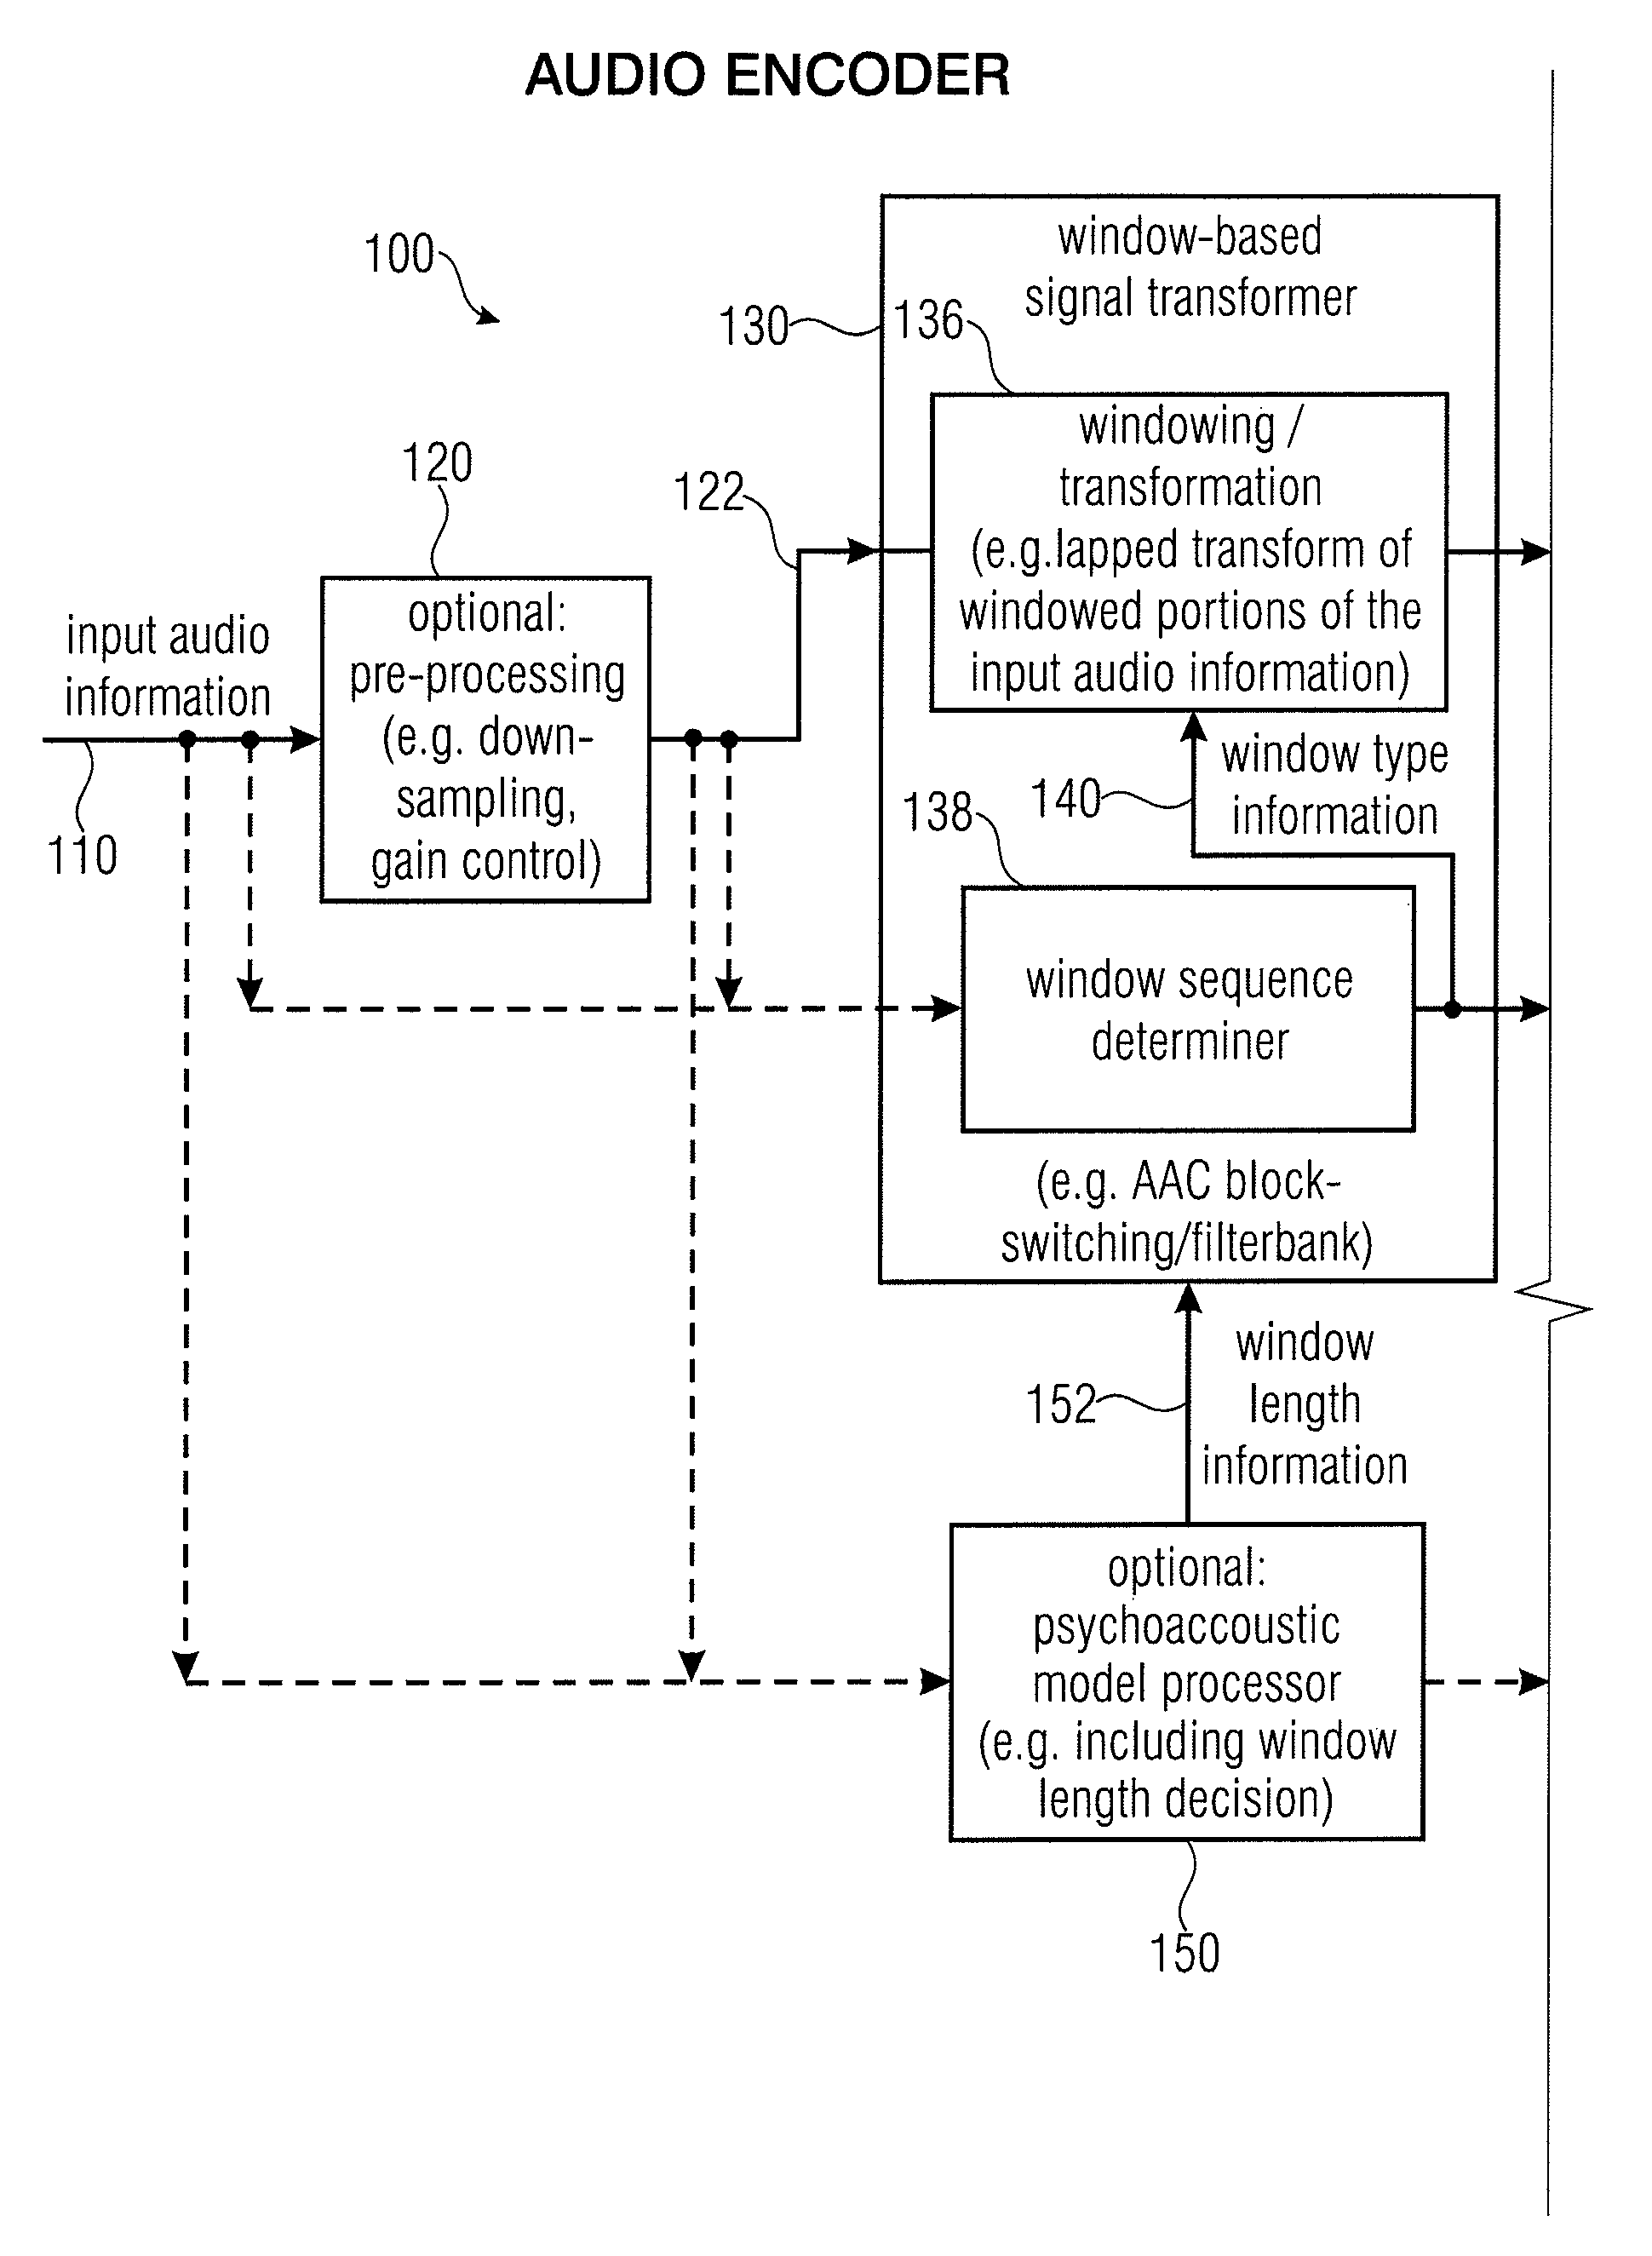 Audio encoder, audio decoder, encoded audio information, methods for encoding and decoding an audio signal and computer program